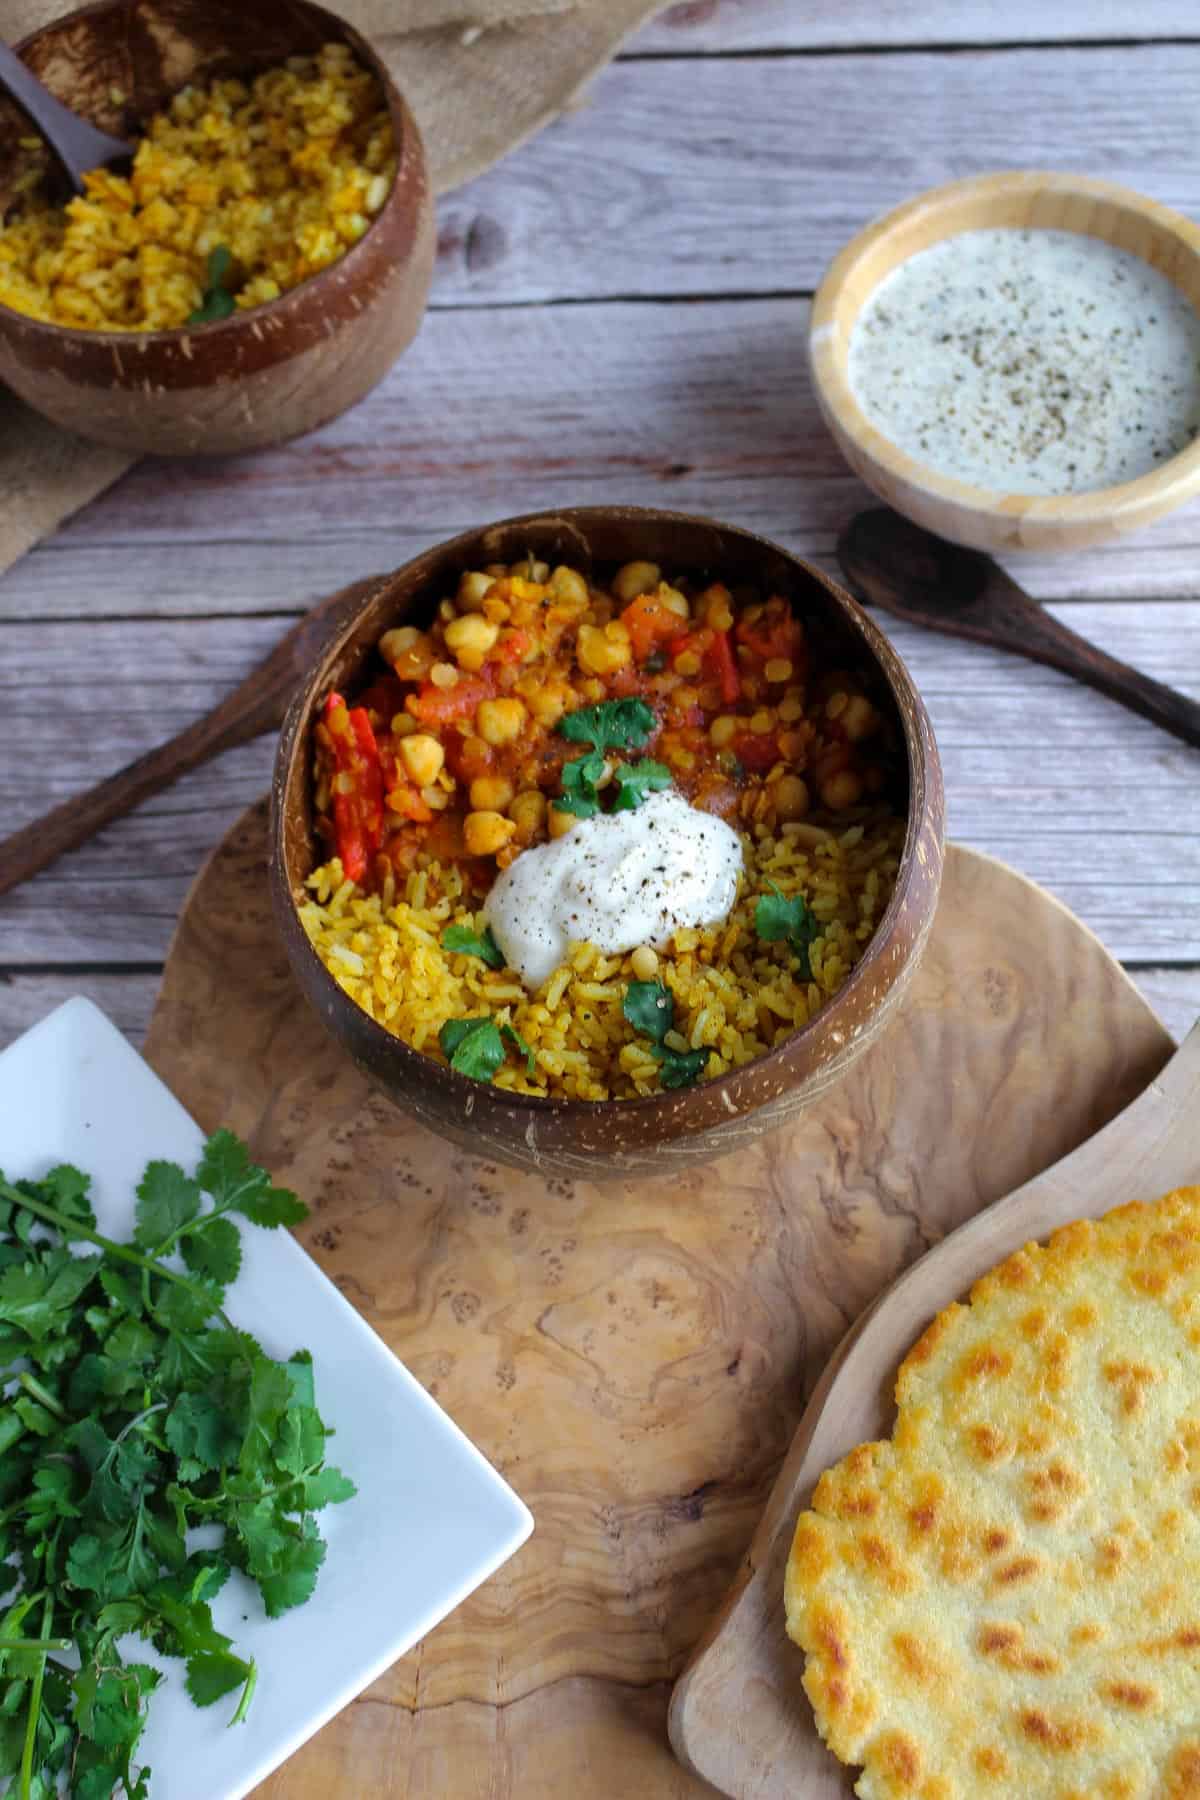 Creamy Chickpea And Lentil Curry Recipe.